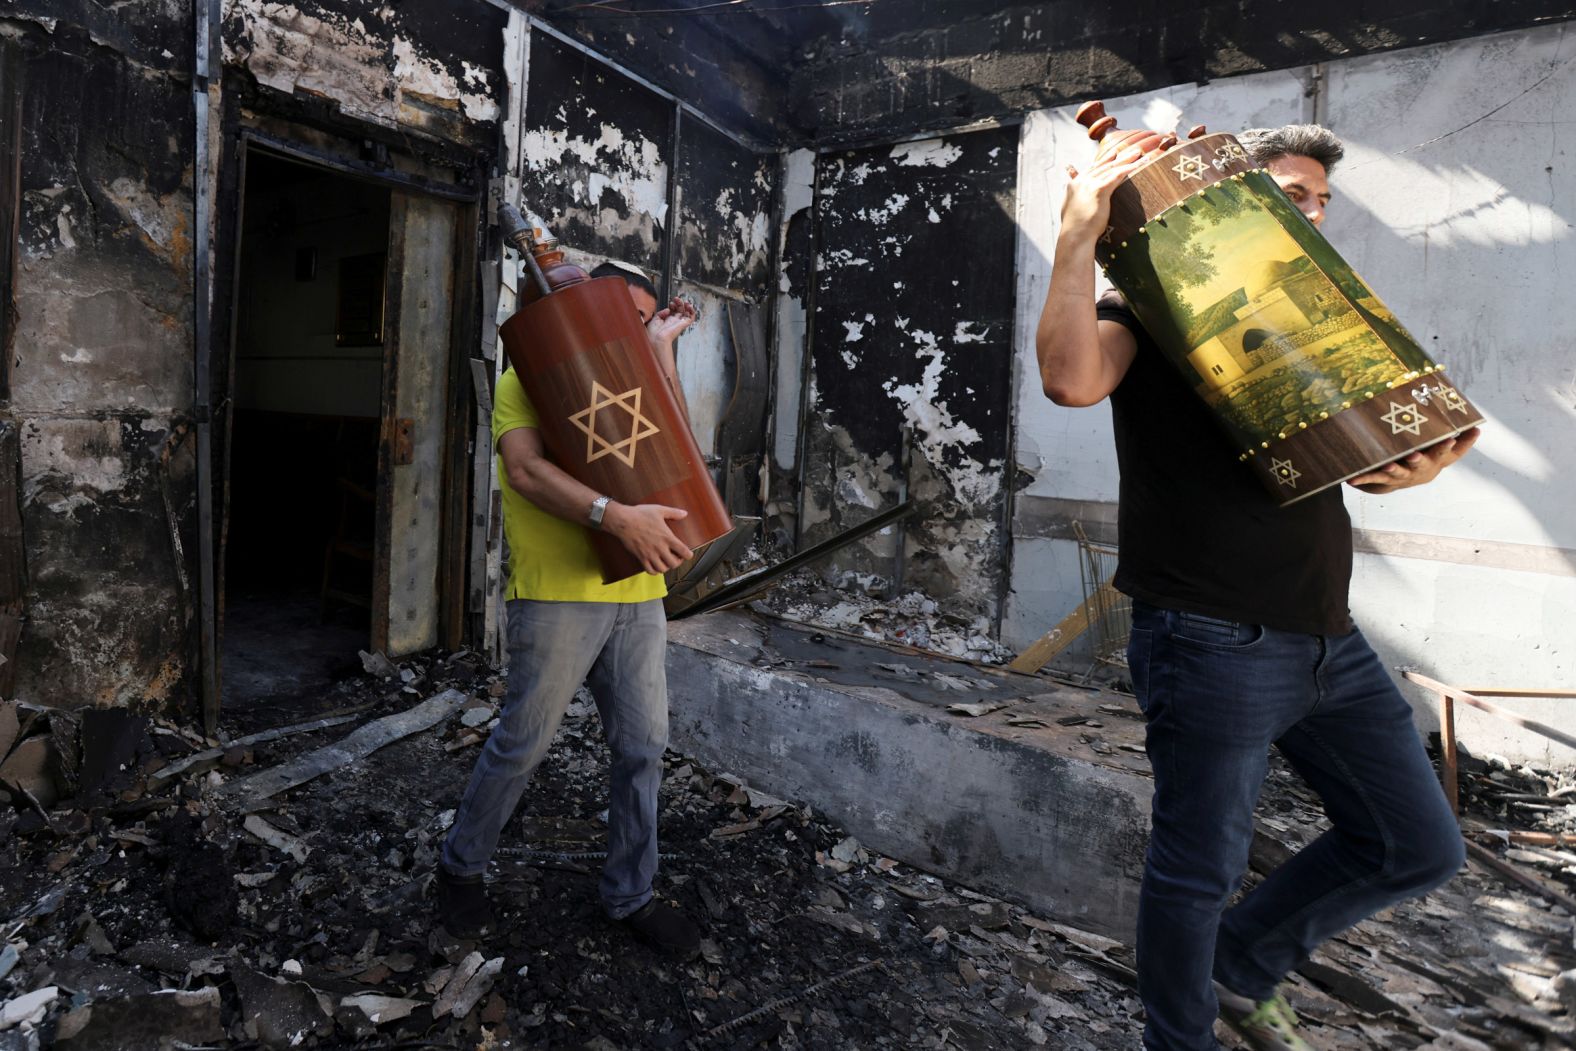 Torah scrolls, Jewish holy scriptures, are removed from a synagogue that was burned during confrontations between demonstrators and police in Lod, Israel, on May 12.